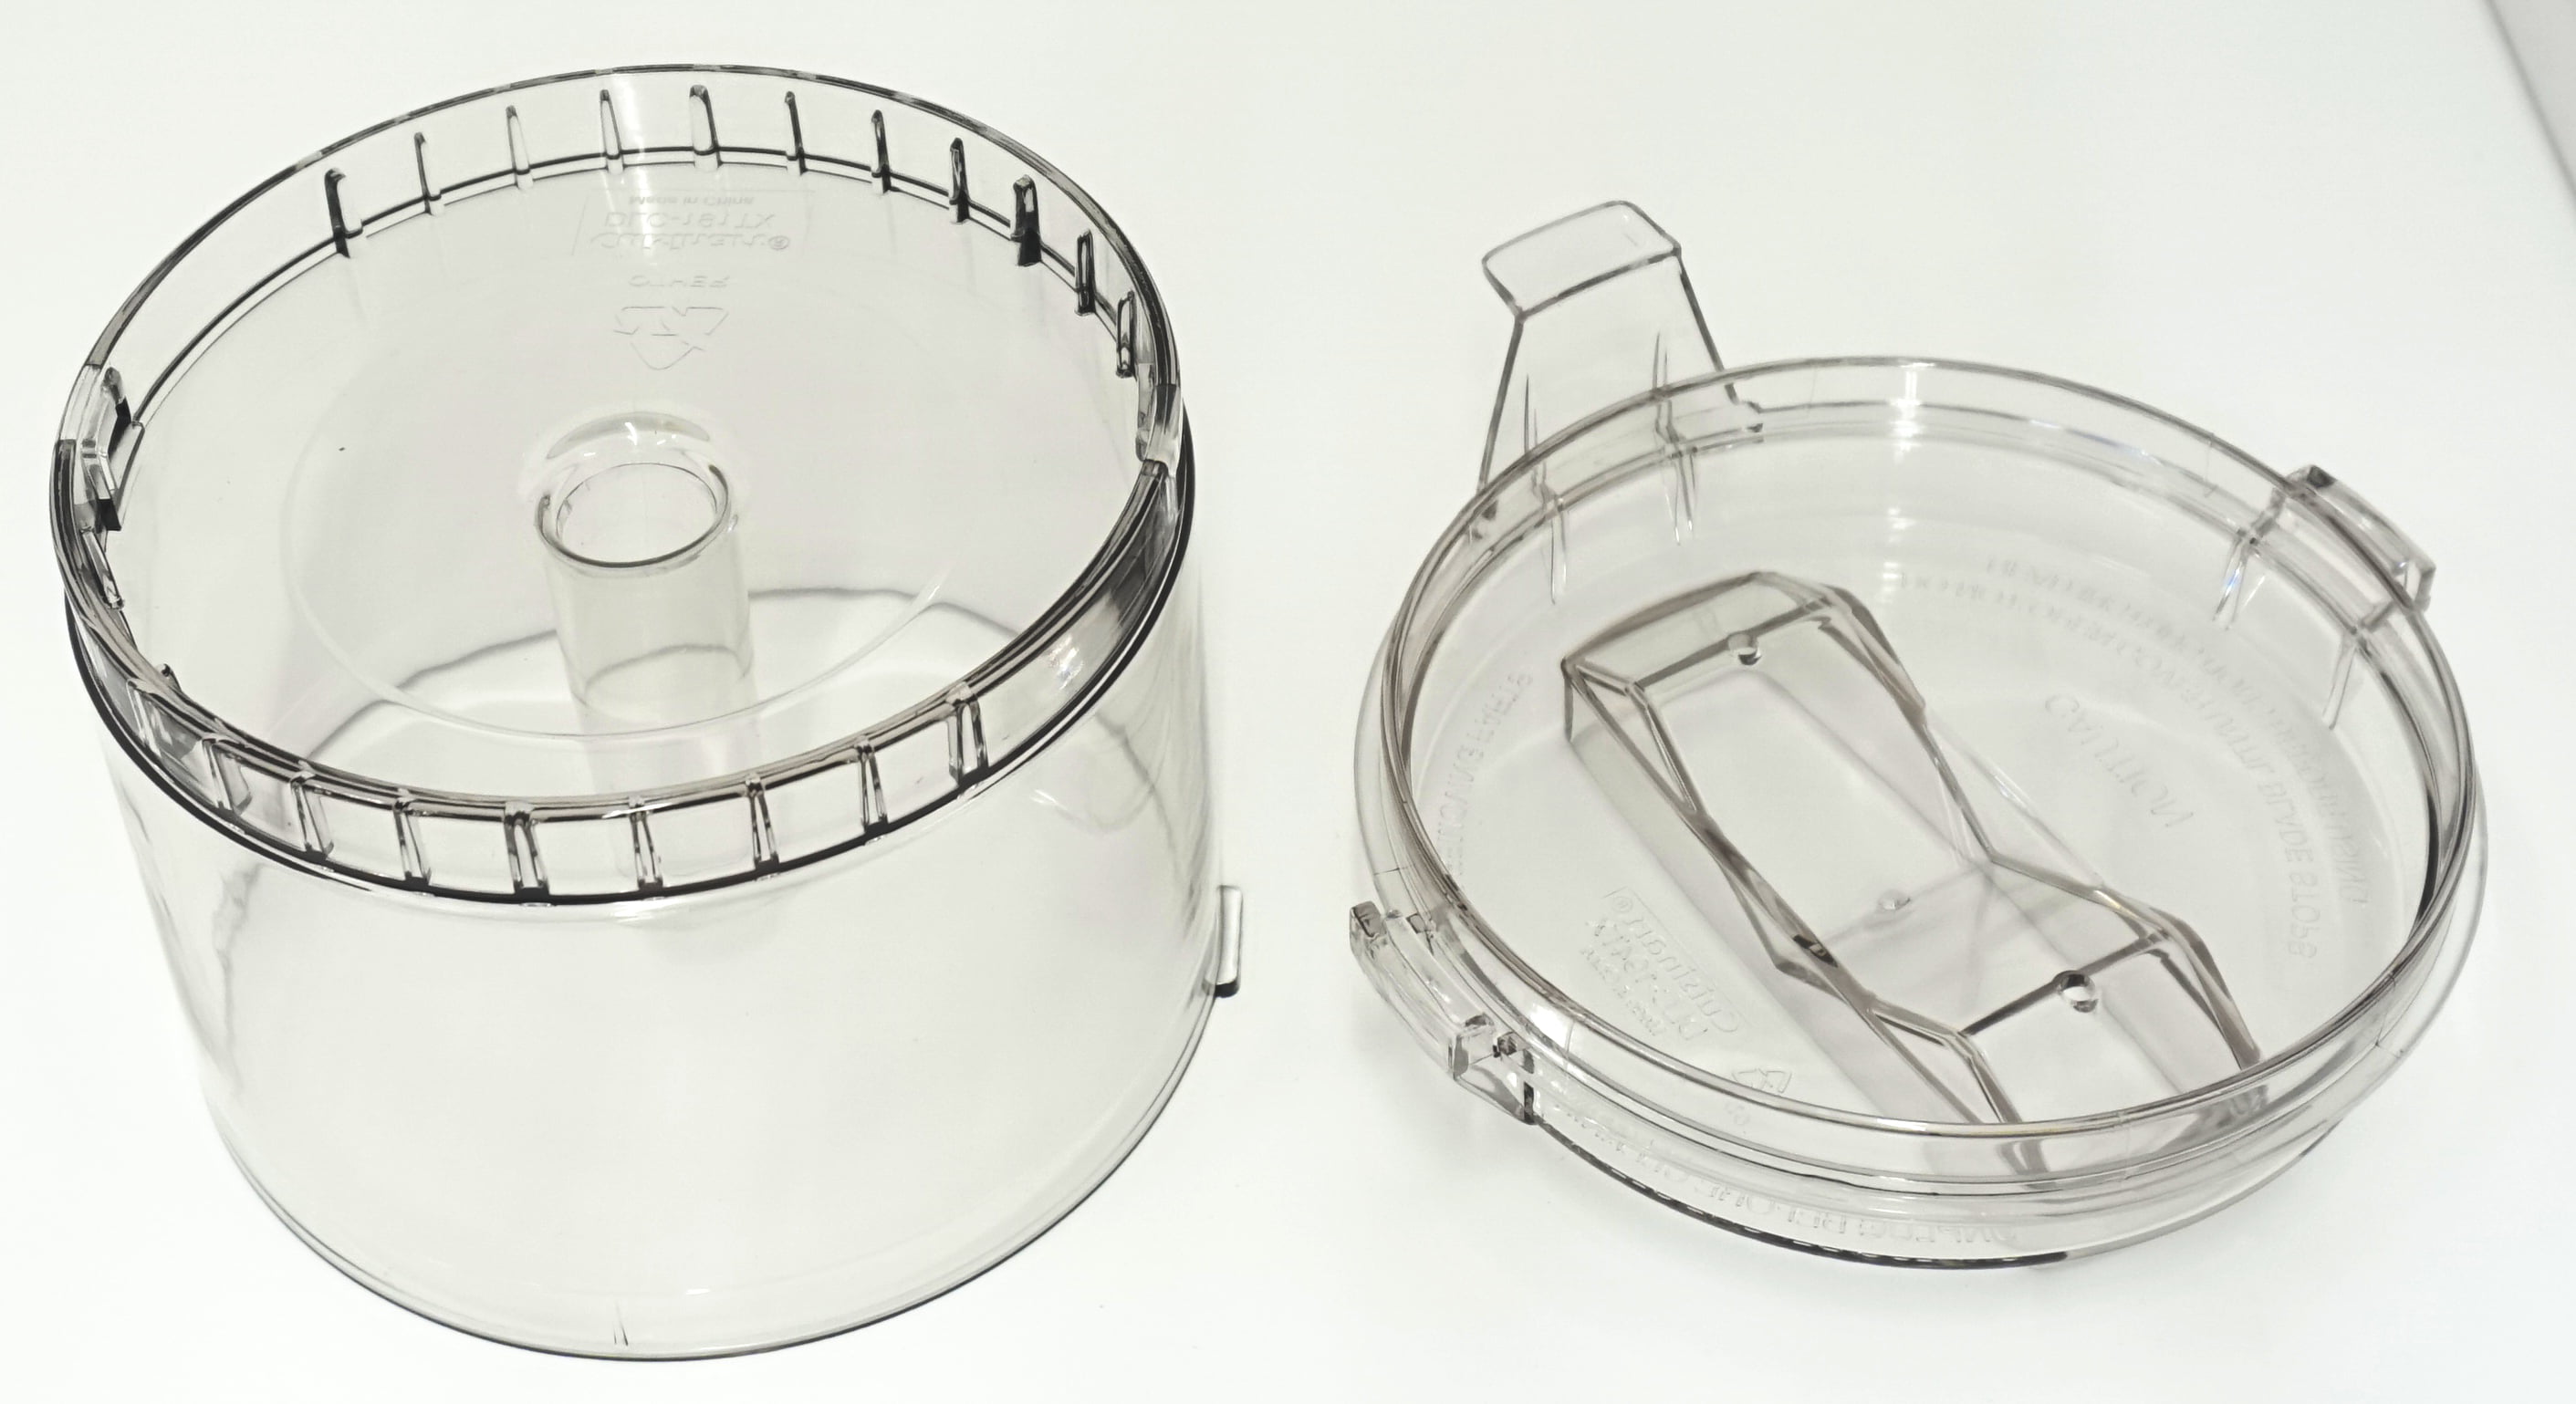 Just in case you didn't know, if parts of your food processor break down,  you can easily order most replacement parts online for it! Just replaced  the main bowl for less than £